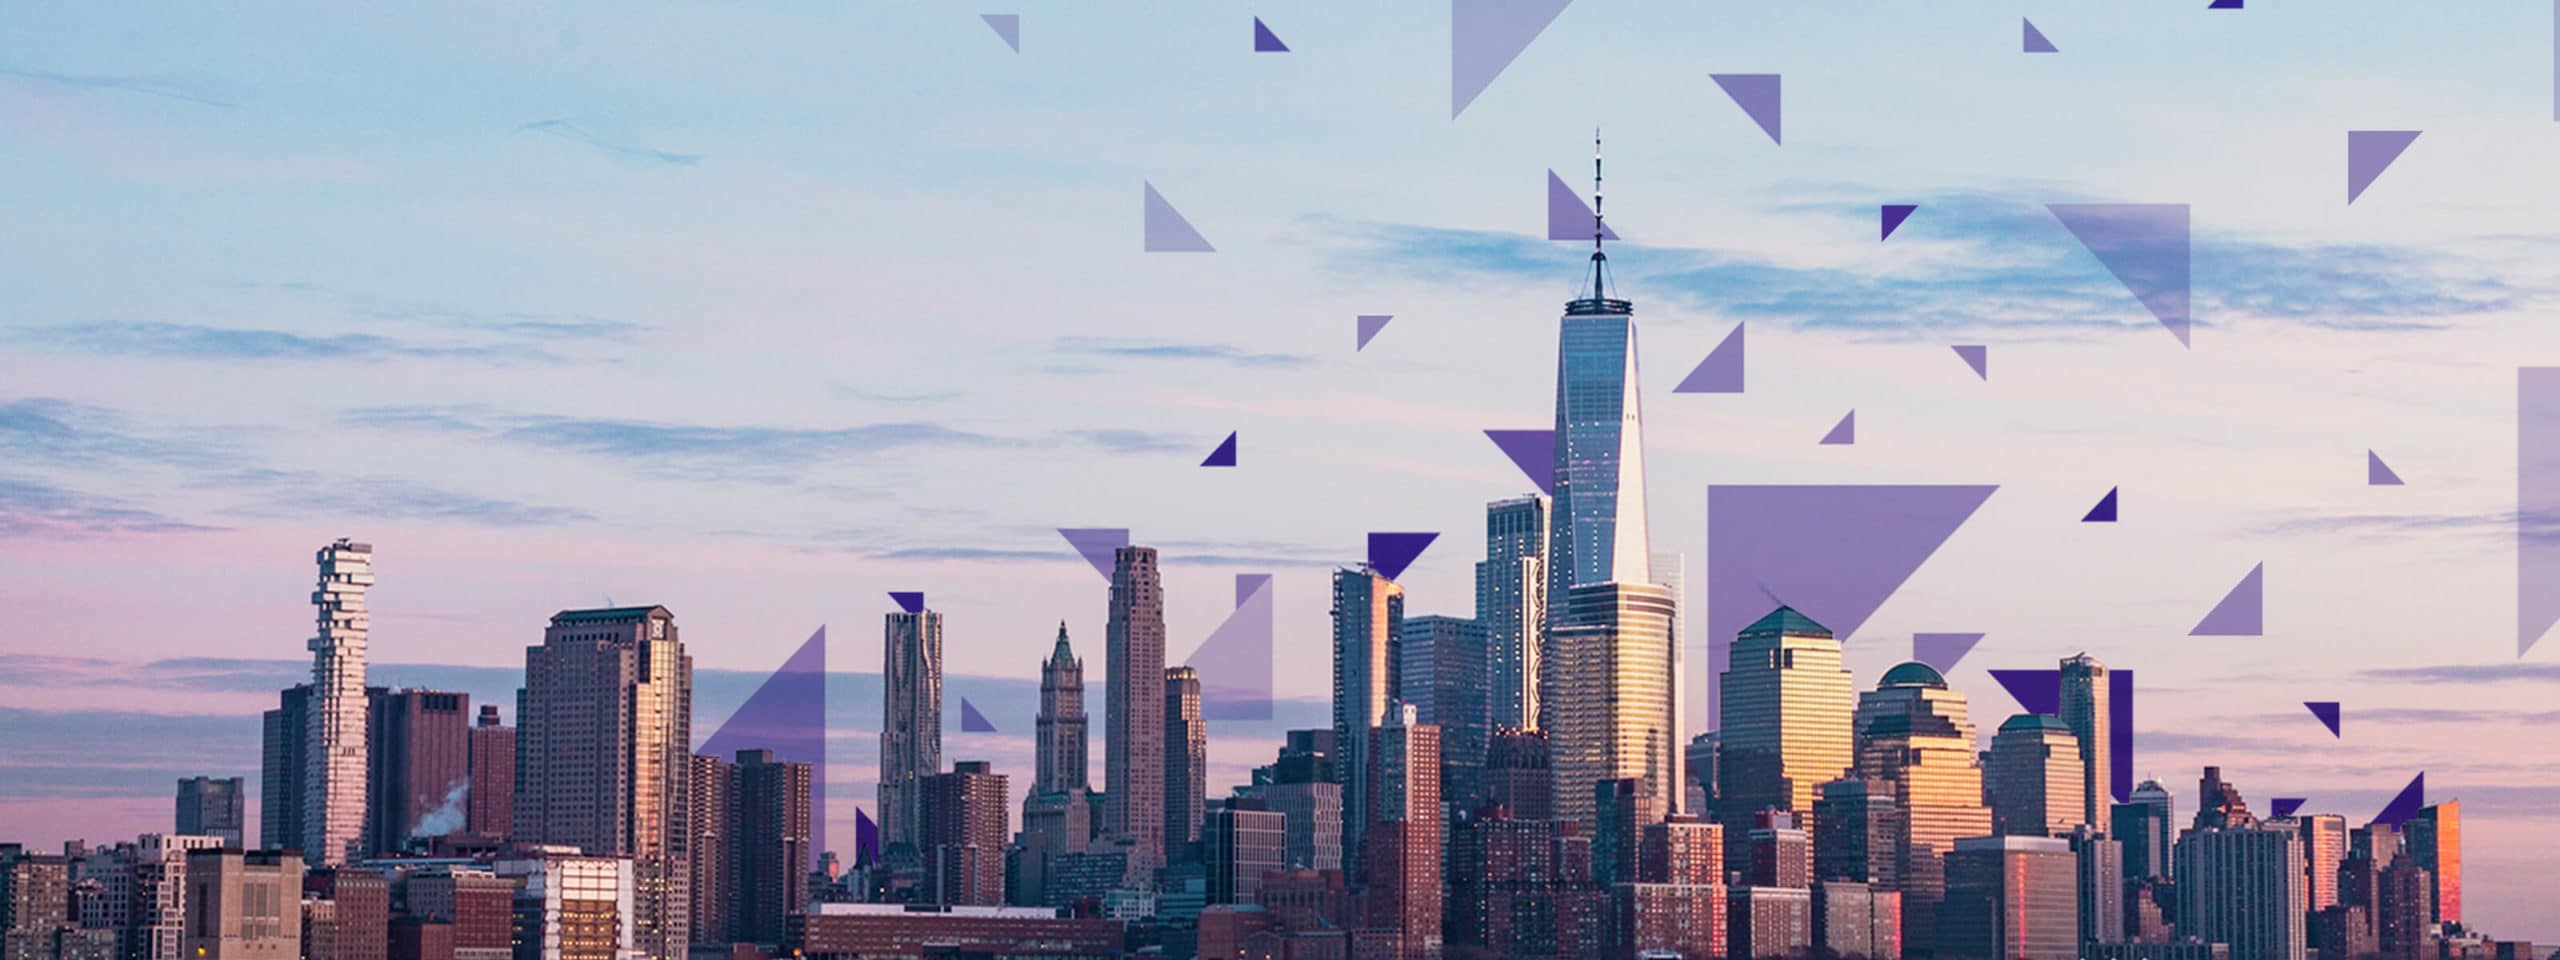 Effectual buildings and purple triangles